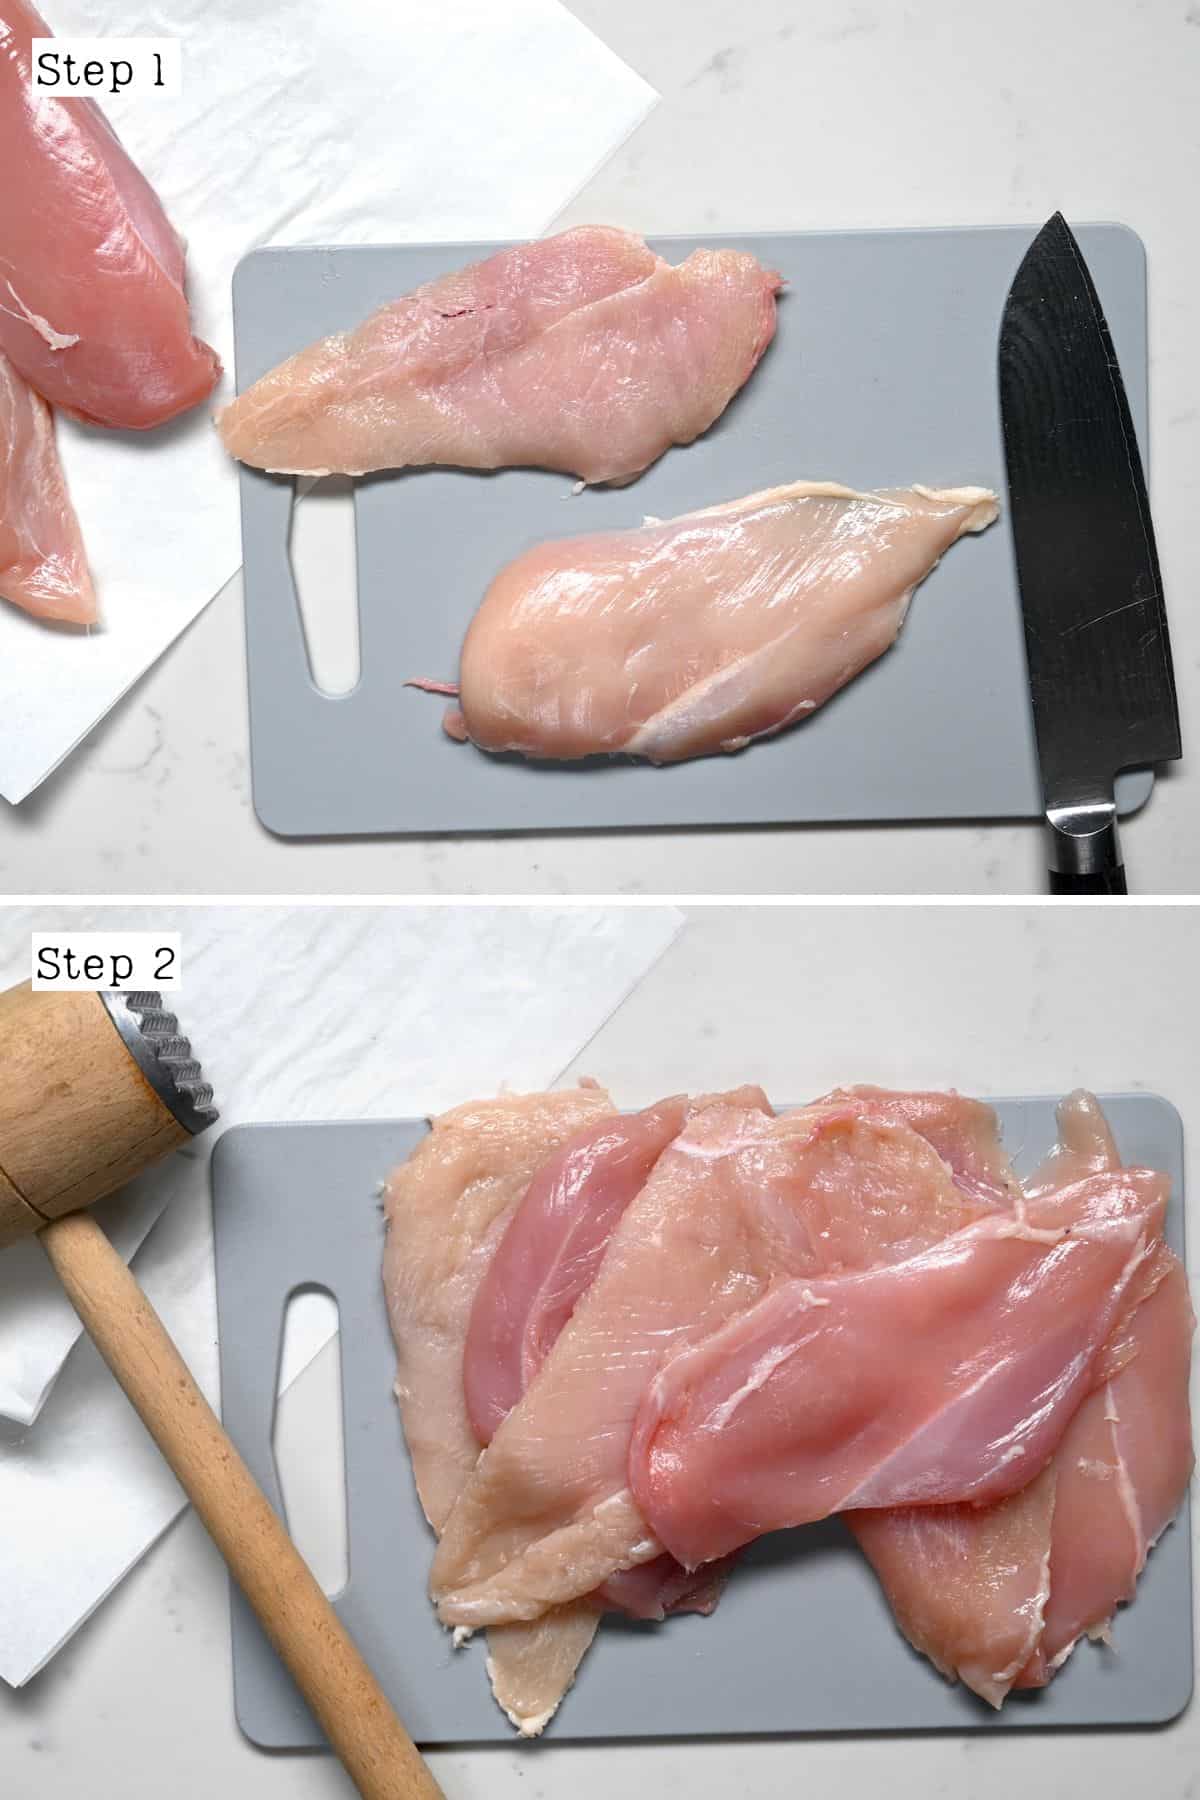 Steps for cutting chicken breasts